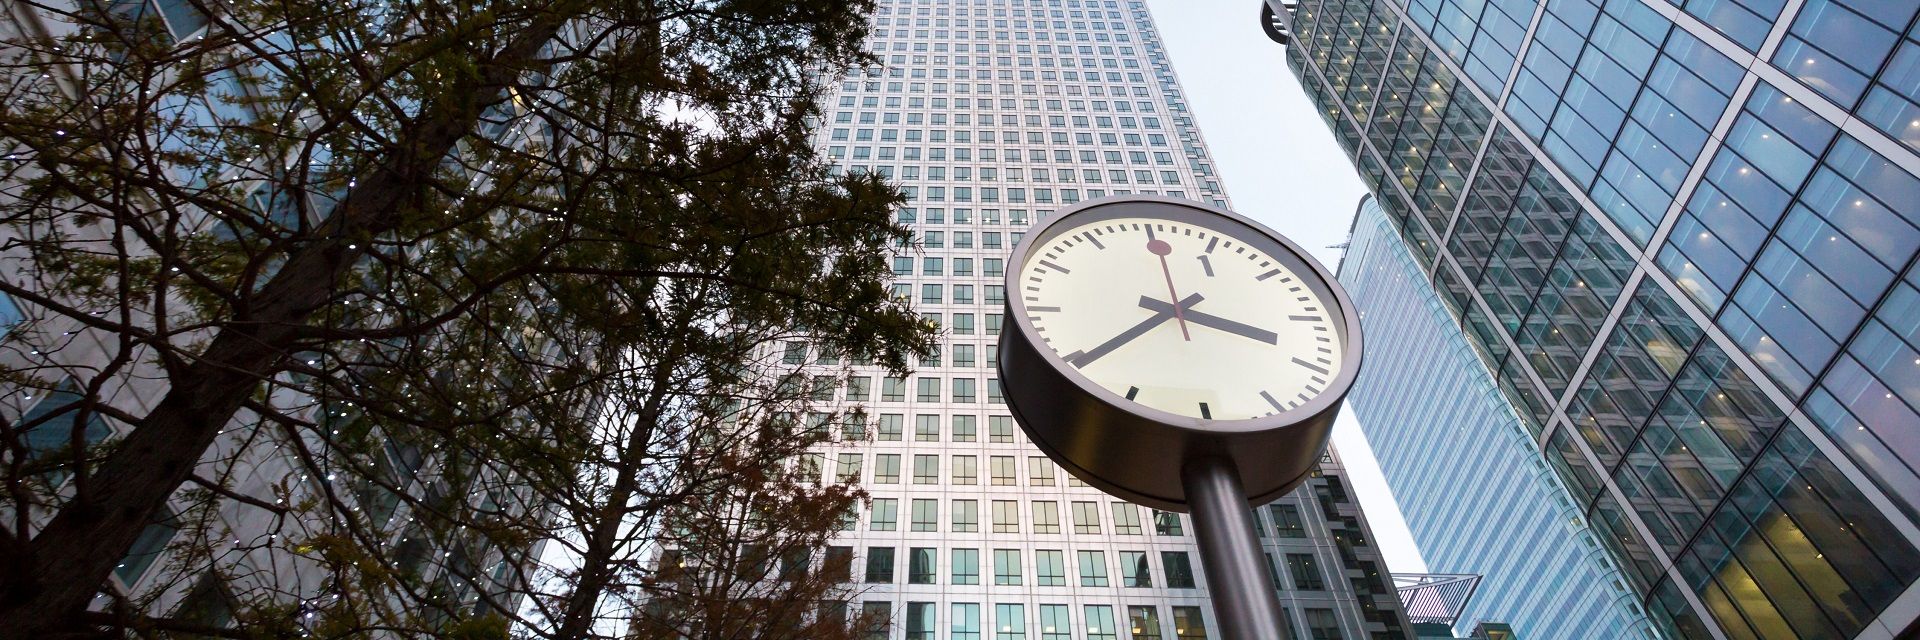 The one Canada square clock in Canary Wharf. Barclays will assist corporates adopt the ISO 20022